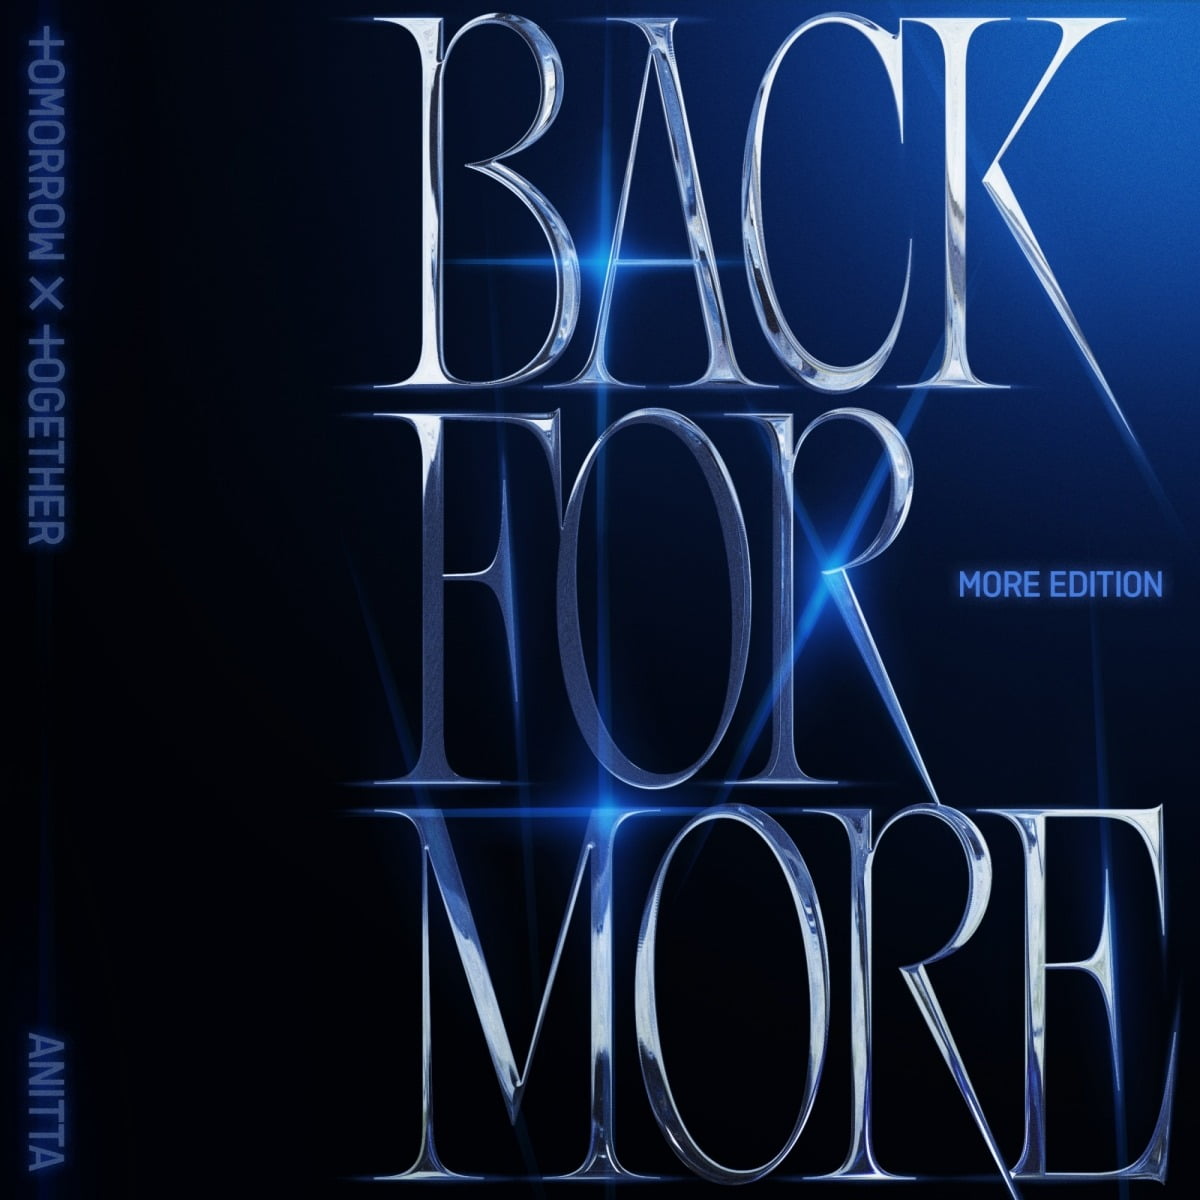 TOMORROW X TOGETHER released 3 versions of 'Back for More'